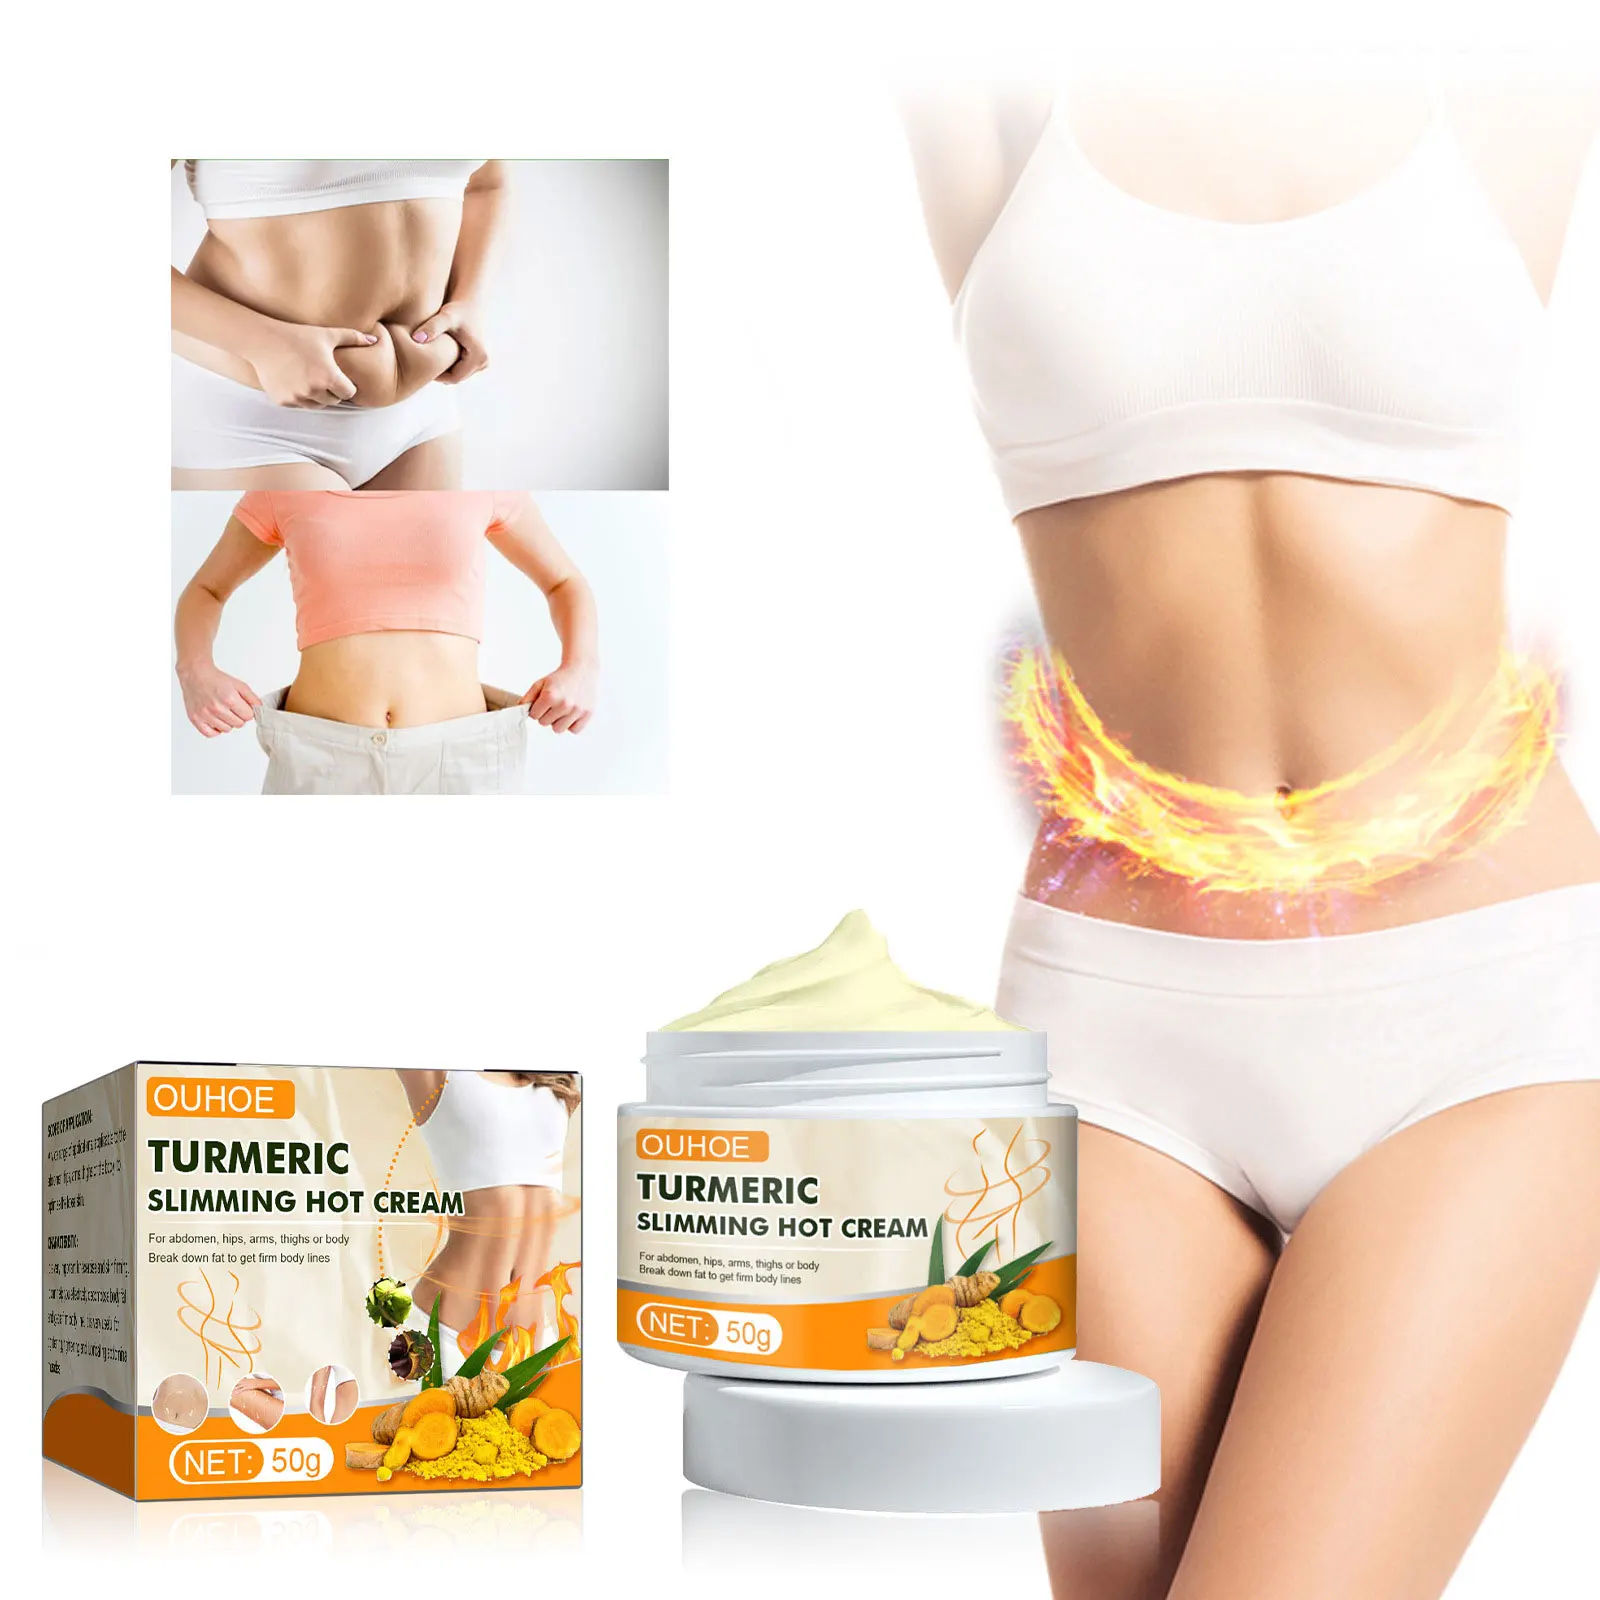 

Anti Cellulite Cream Weight Loss Burning Cellulite Thick Thighs Sculpting Waistline Flat Tummy Firming Slimming Shaping Lotion